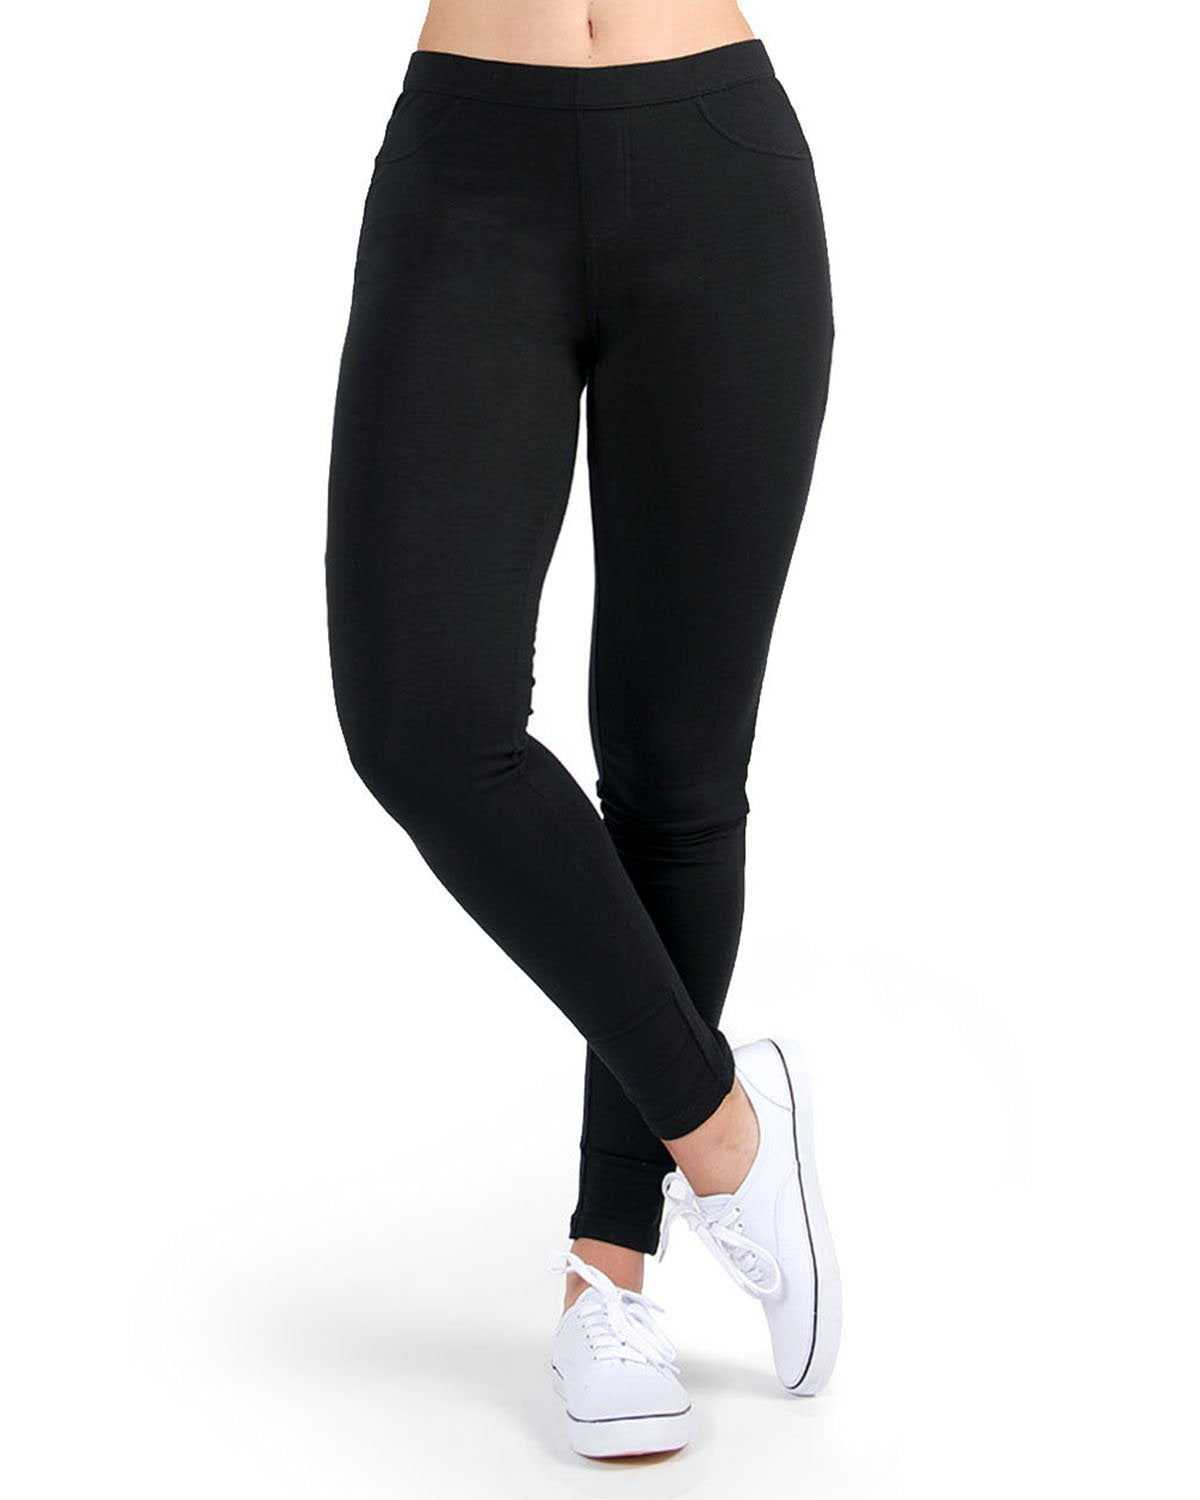 French Terry Straight Leg Yoga Pants - Mommas, Babies, and Blessings